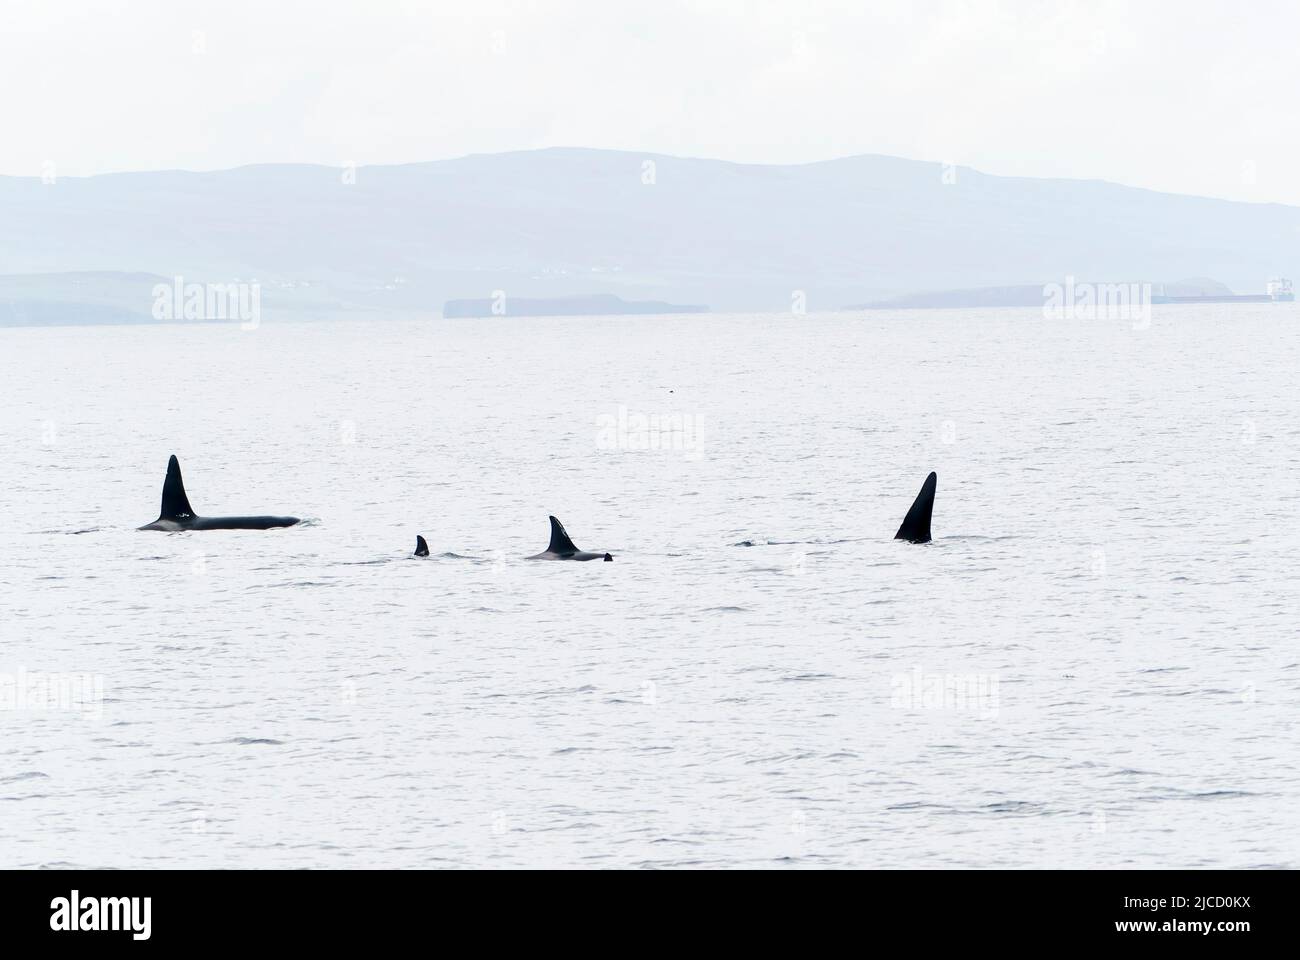 Orca or Killer Whale, Orcinus orca, pod of 4 individuals with dorsal fins visible, off Lochmaddy, Scotland, United Kingdom, 28 May 2022 Stock Photo